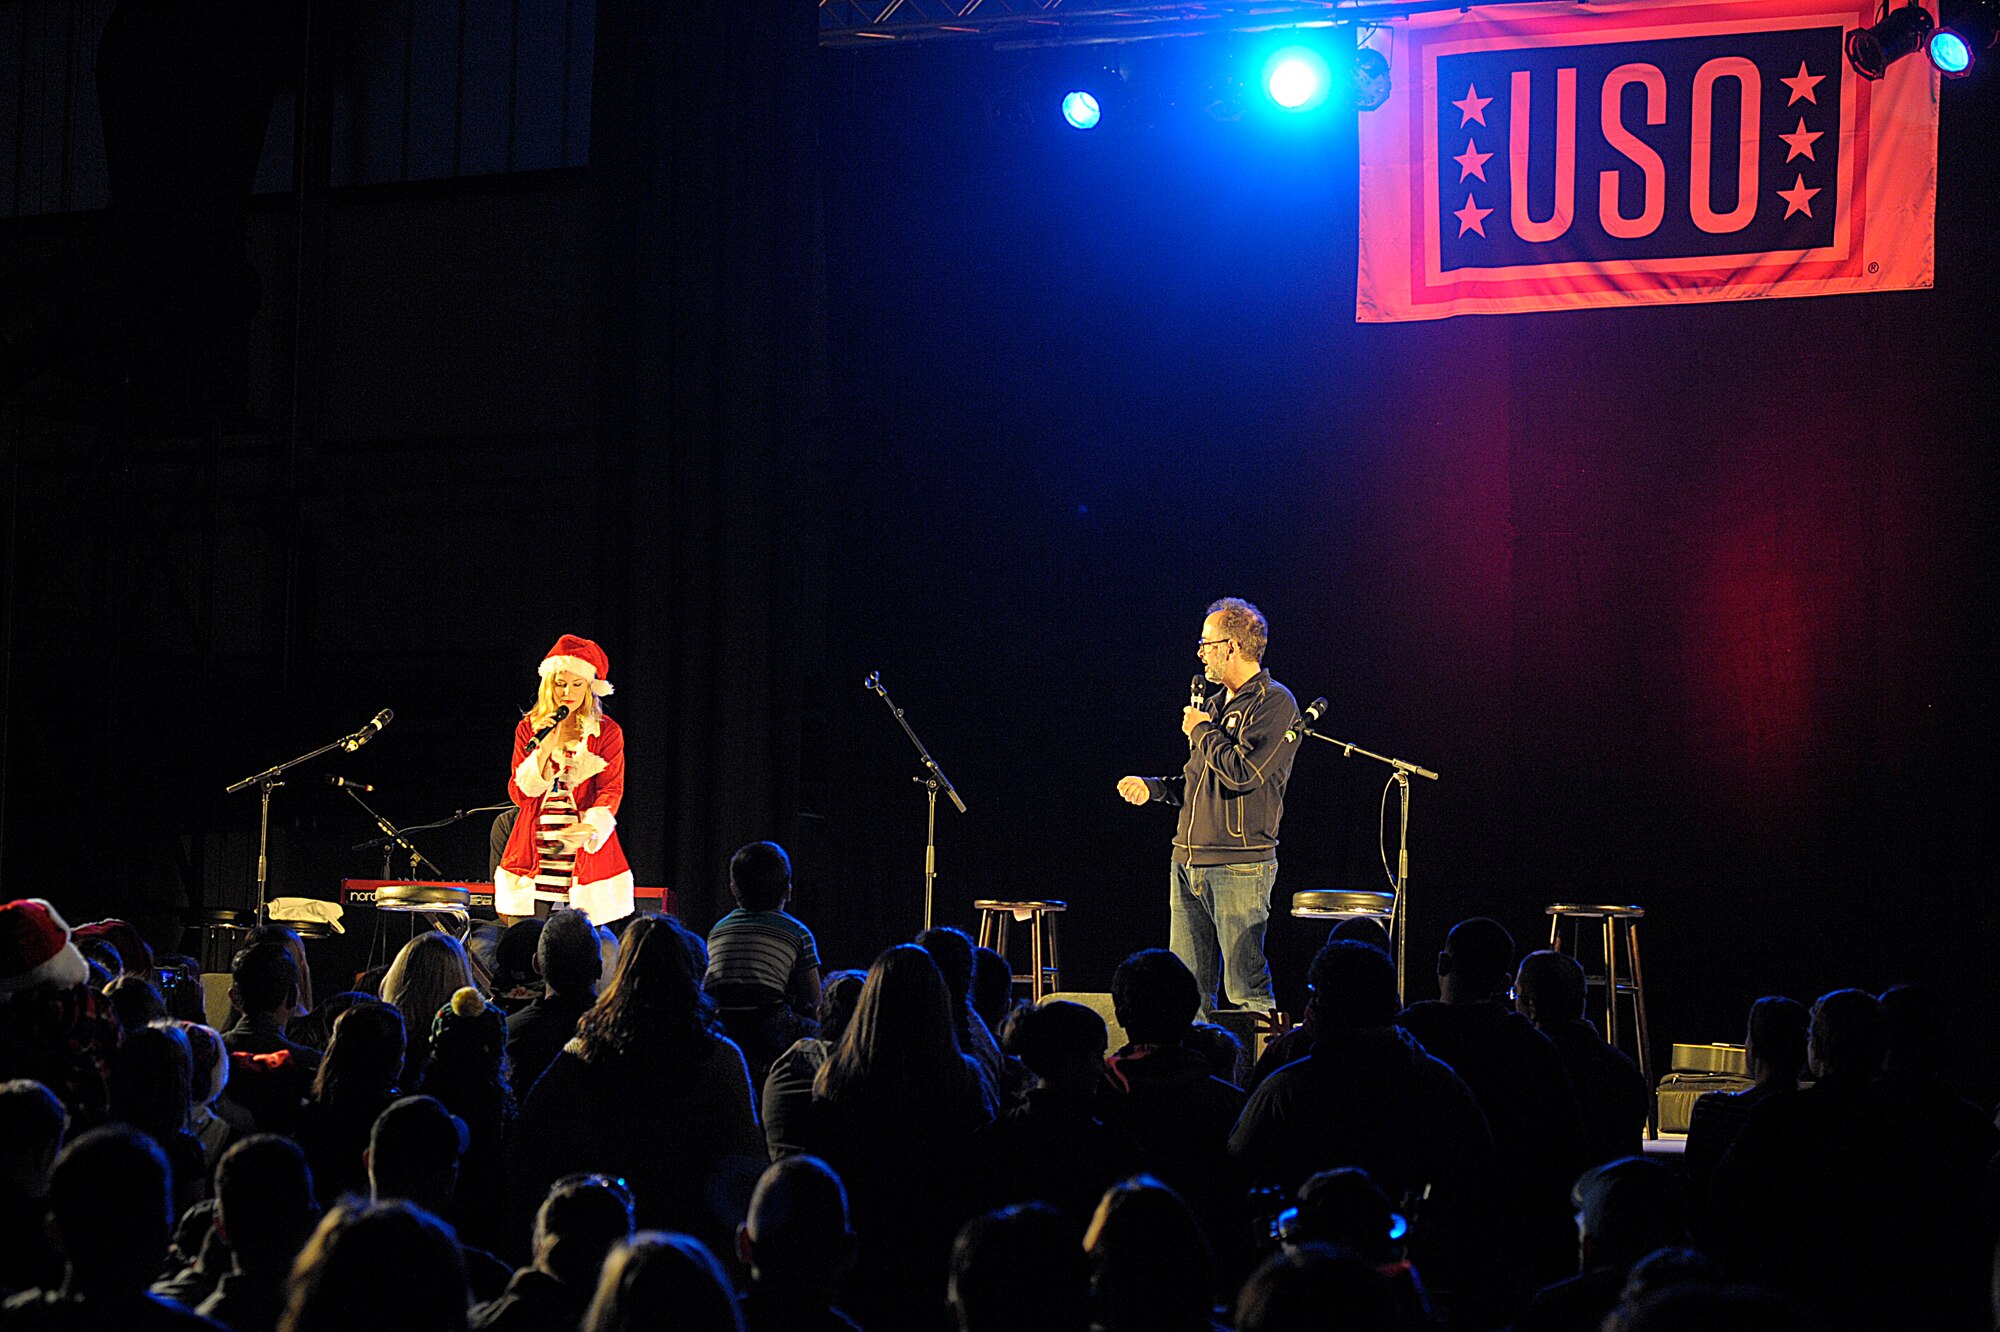 Actors Elizabeth Banks and David Wain talk with the crowd during the 2015 USO Holiday Troop Tour Dec. 9, 2015, at Ramstein Air Base, Germany. Ramstein was the last stop of the 15th annual tour. (U.S. Air Force photo/Staff Sgt. Timothy Moore)